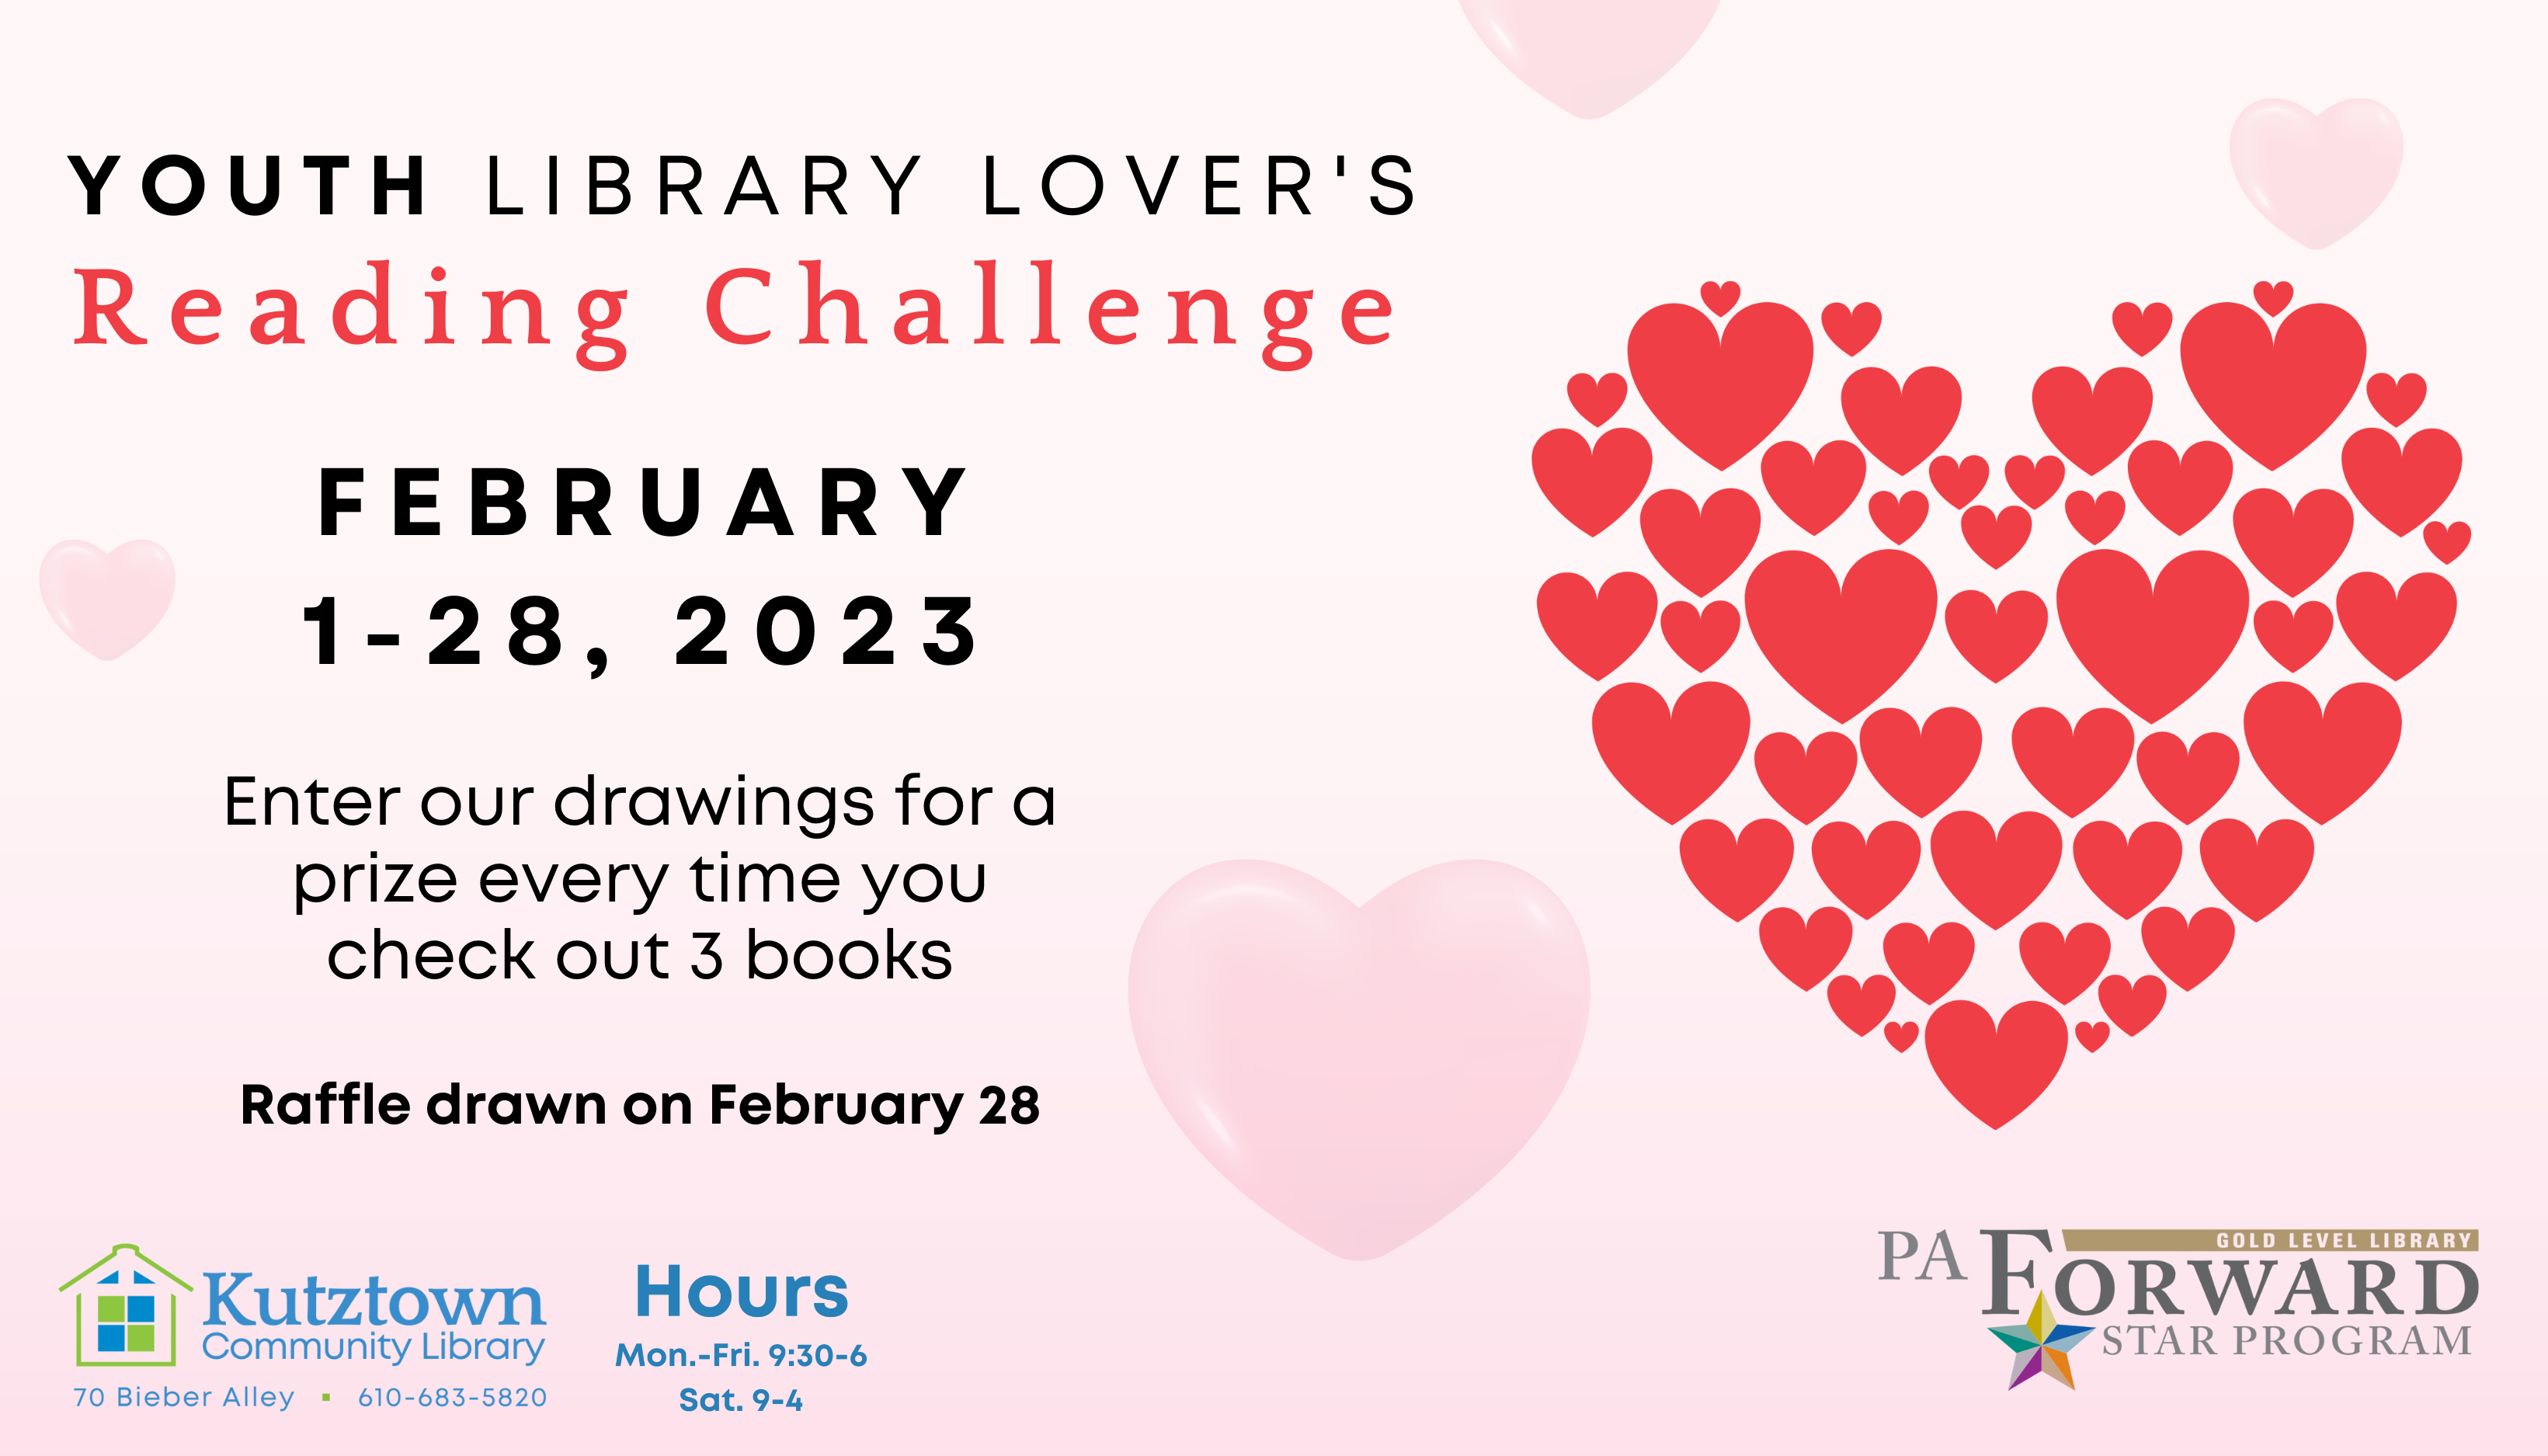 The challenge takes place February 1st-28th for ages 0-18